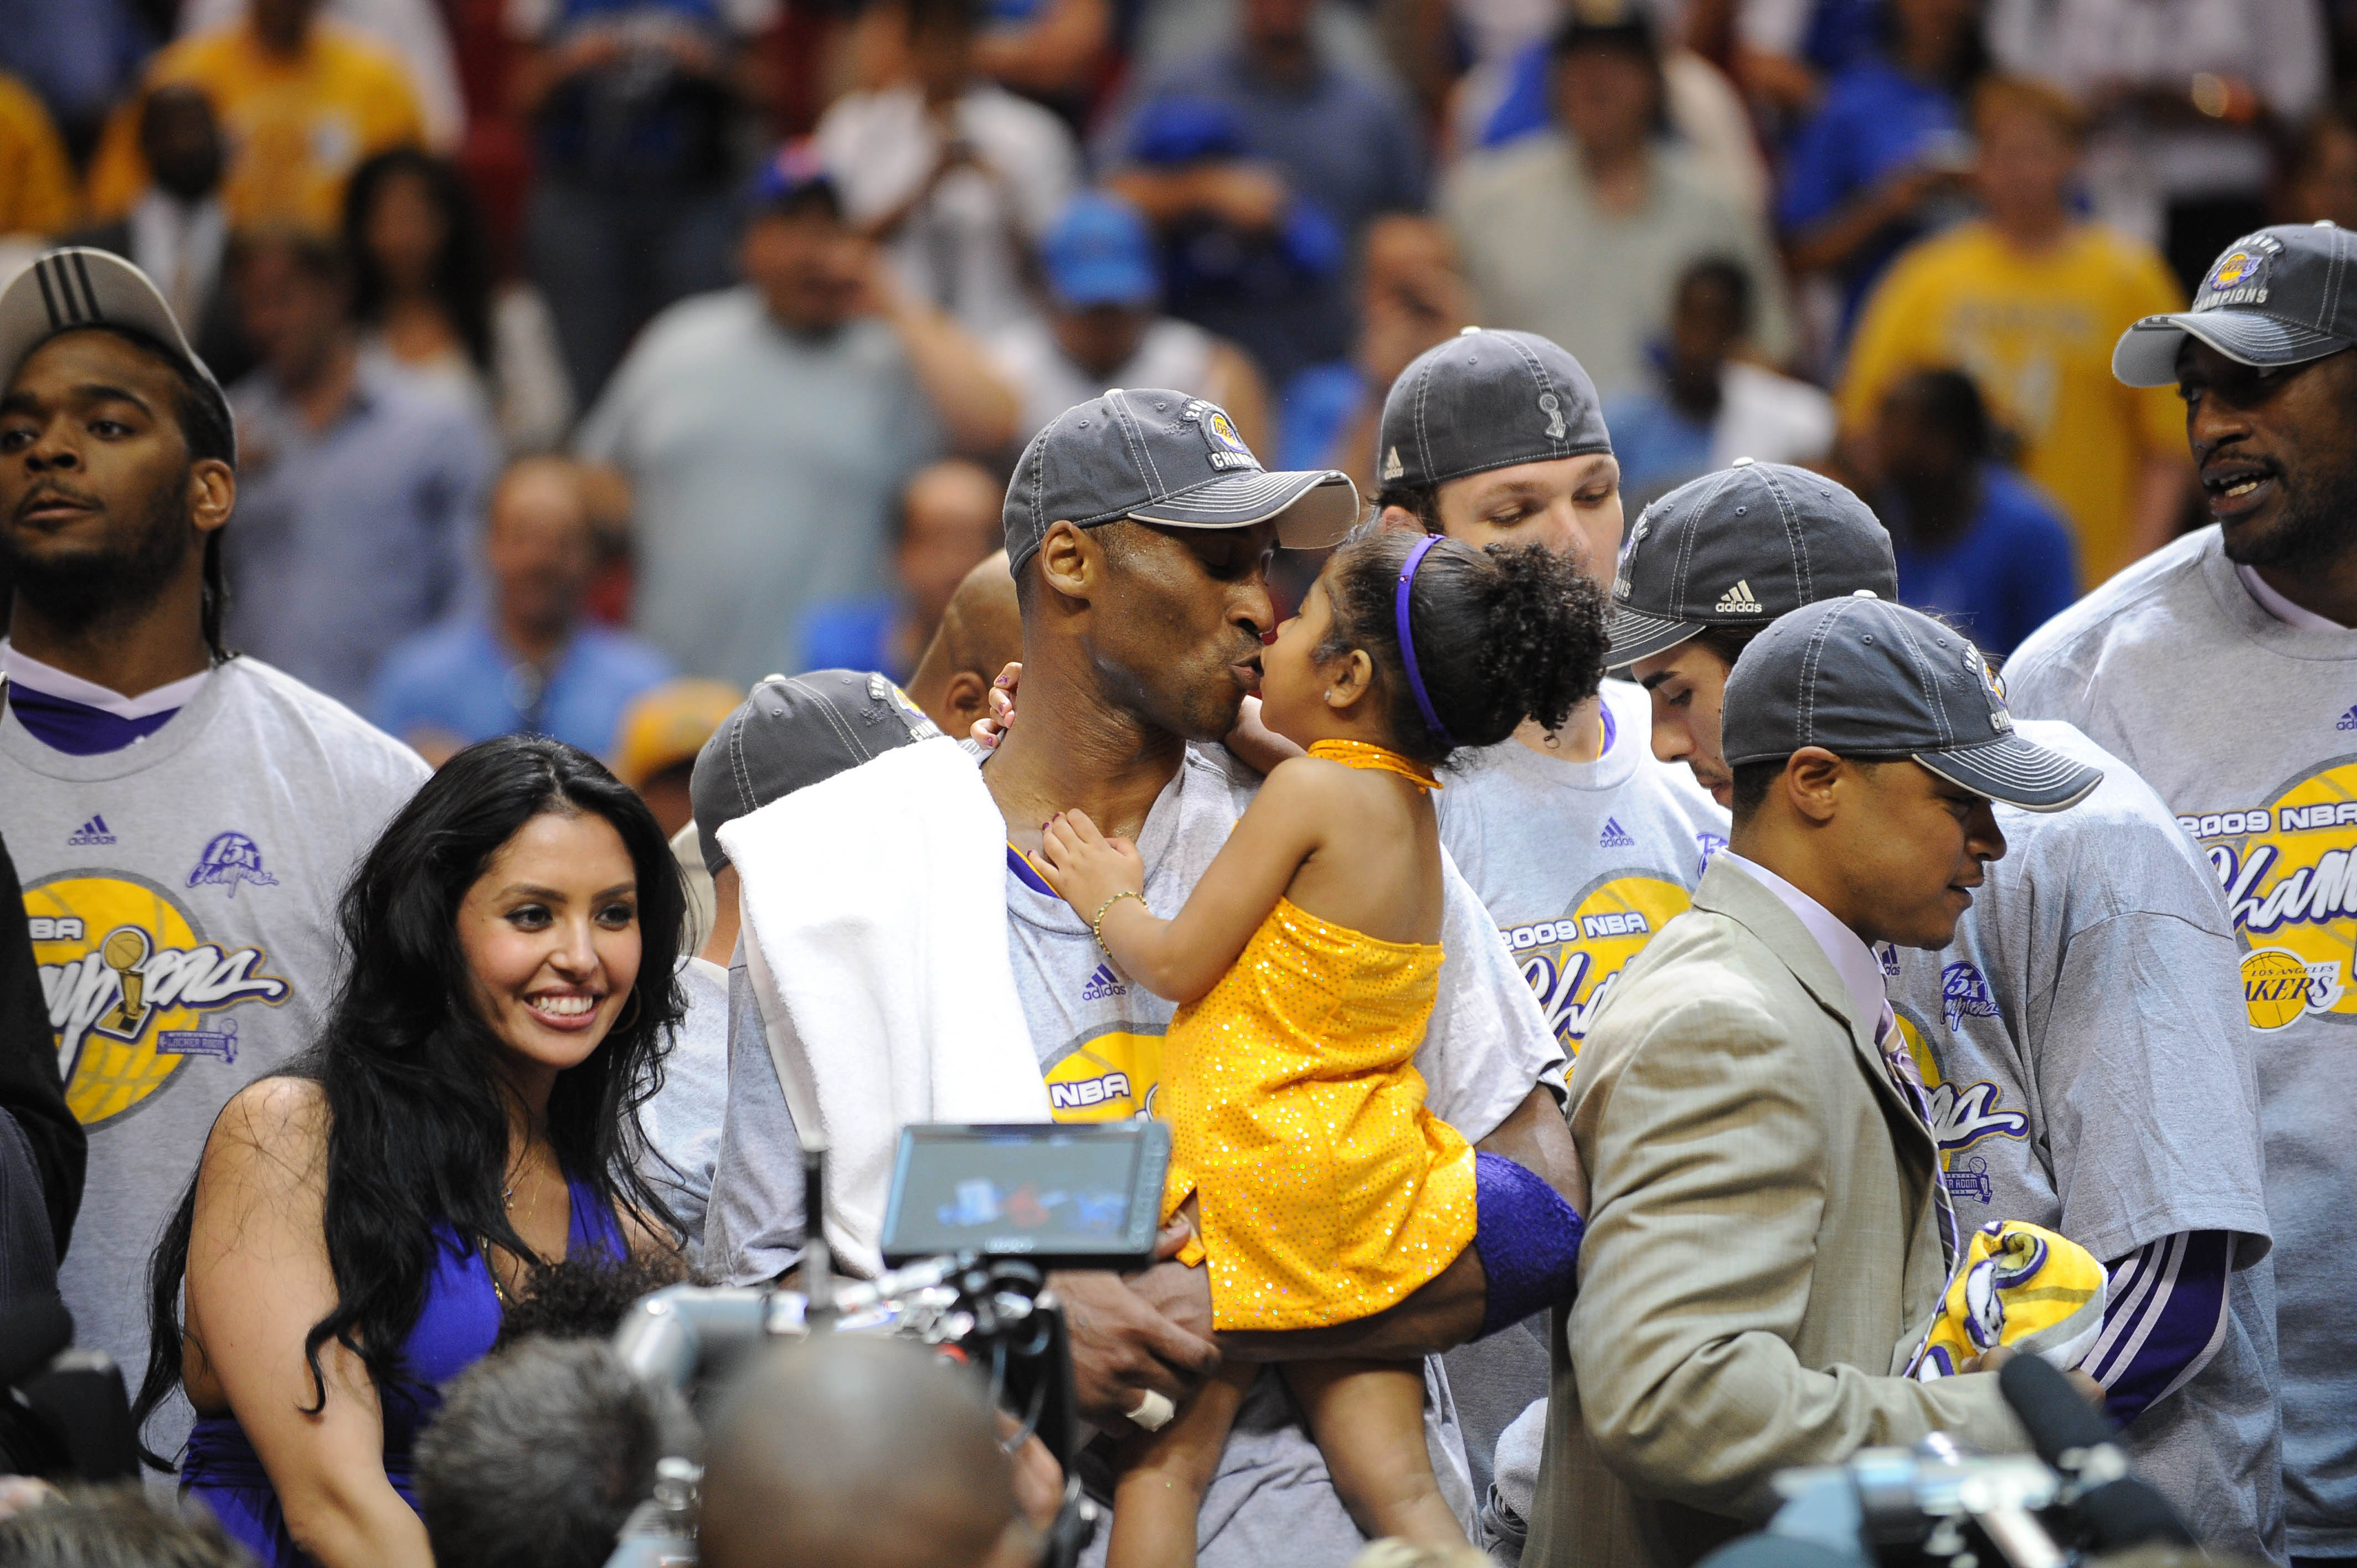 Kobe Bryant pictured celebrating victory with his family following Game 5 of the NBA Finals at Amway Arena on June 14, 2009 in Orlando, Florida | Source: Getty Images